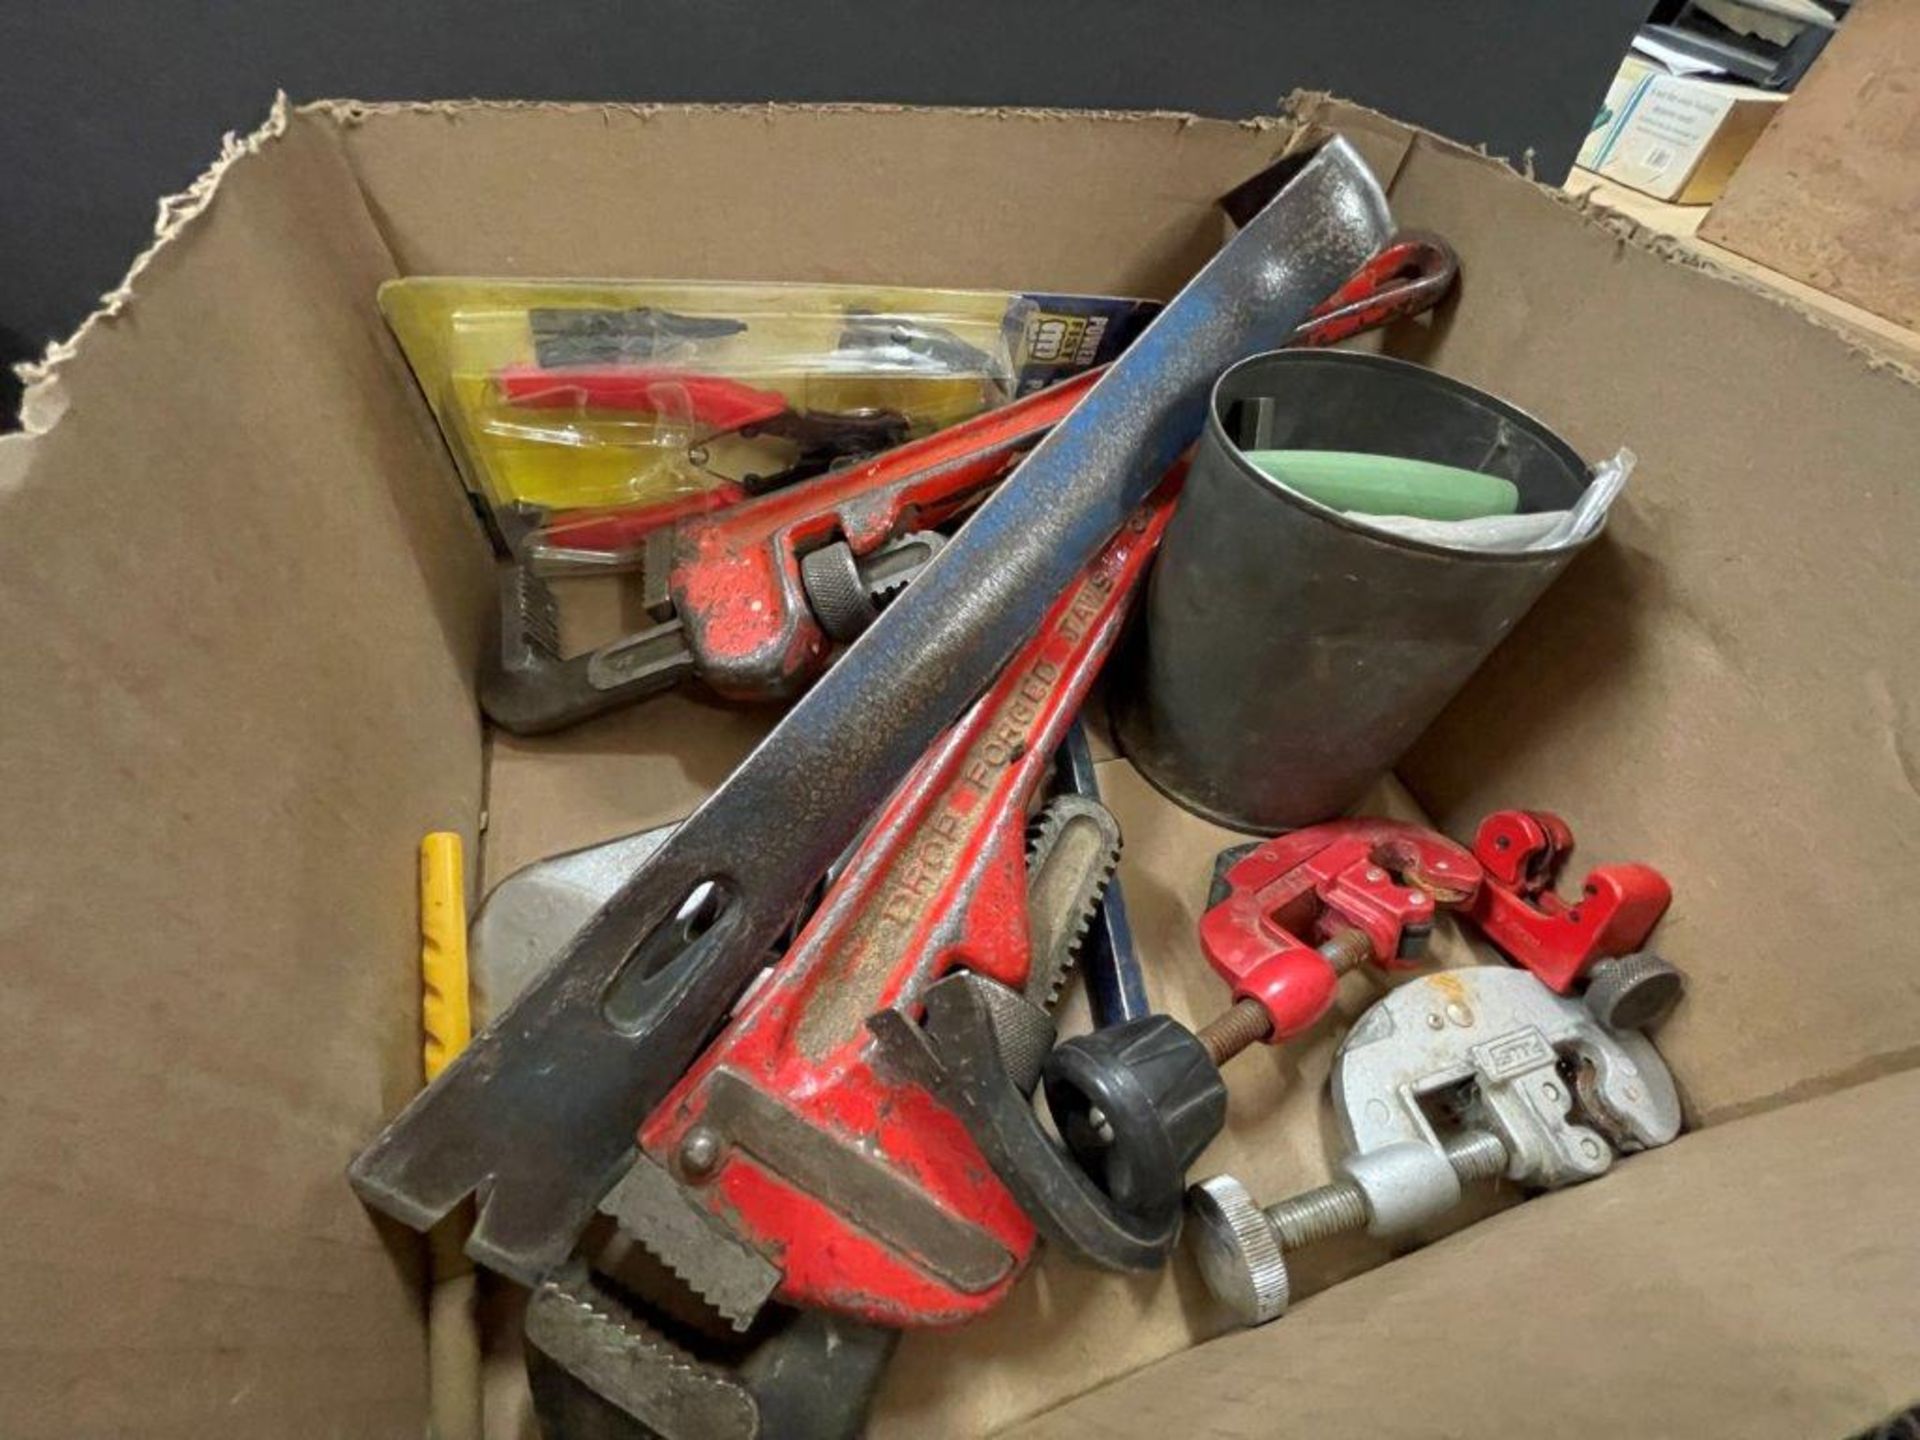 L/O ASSORTED TOOLS PIPE WRENCHES, CRESCENT WRENCH, TUBING CUTTERS, SNAP RING PLIERS - Image 2 of 2